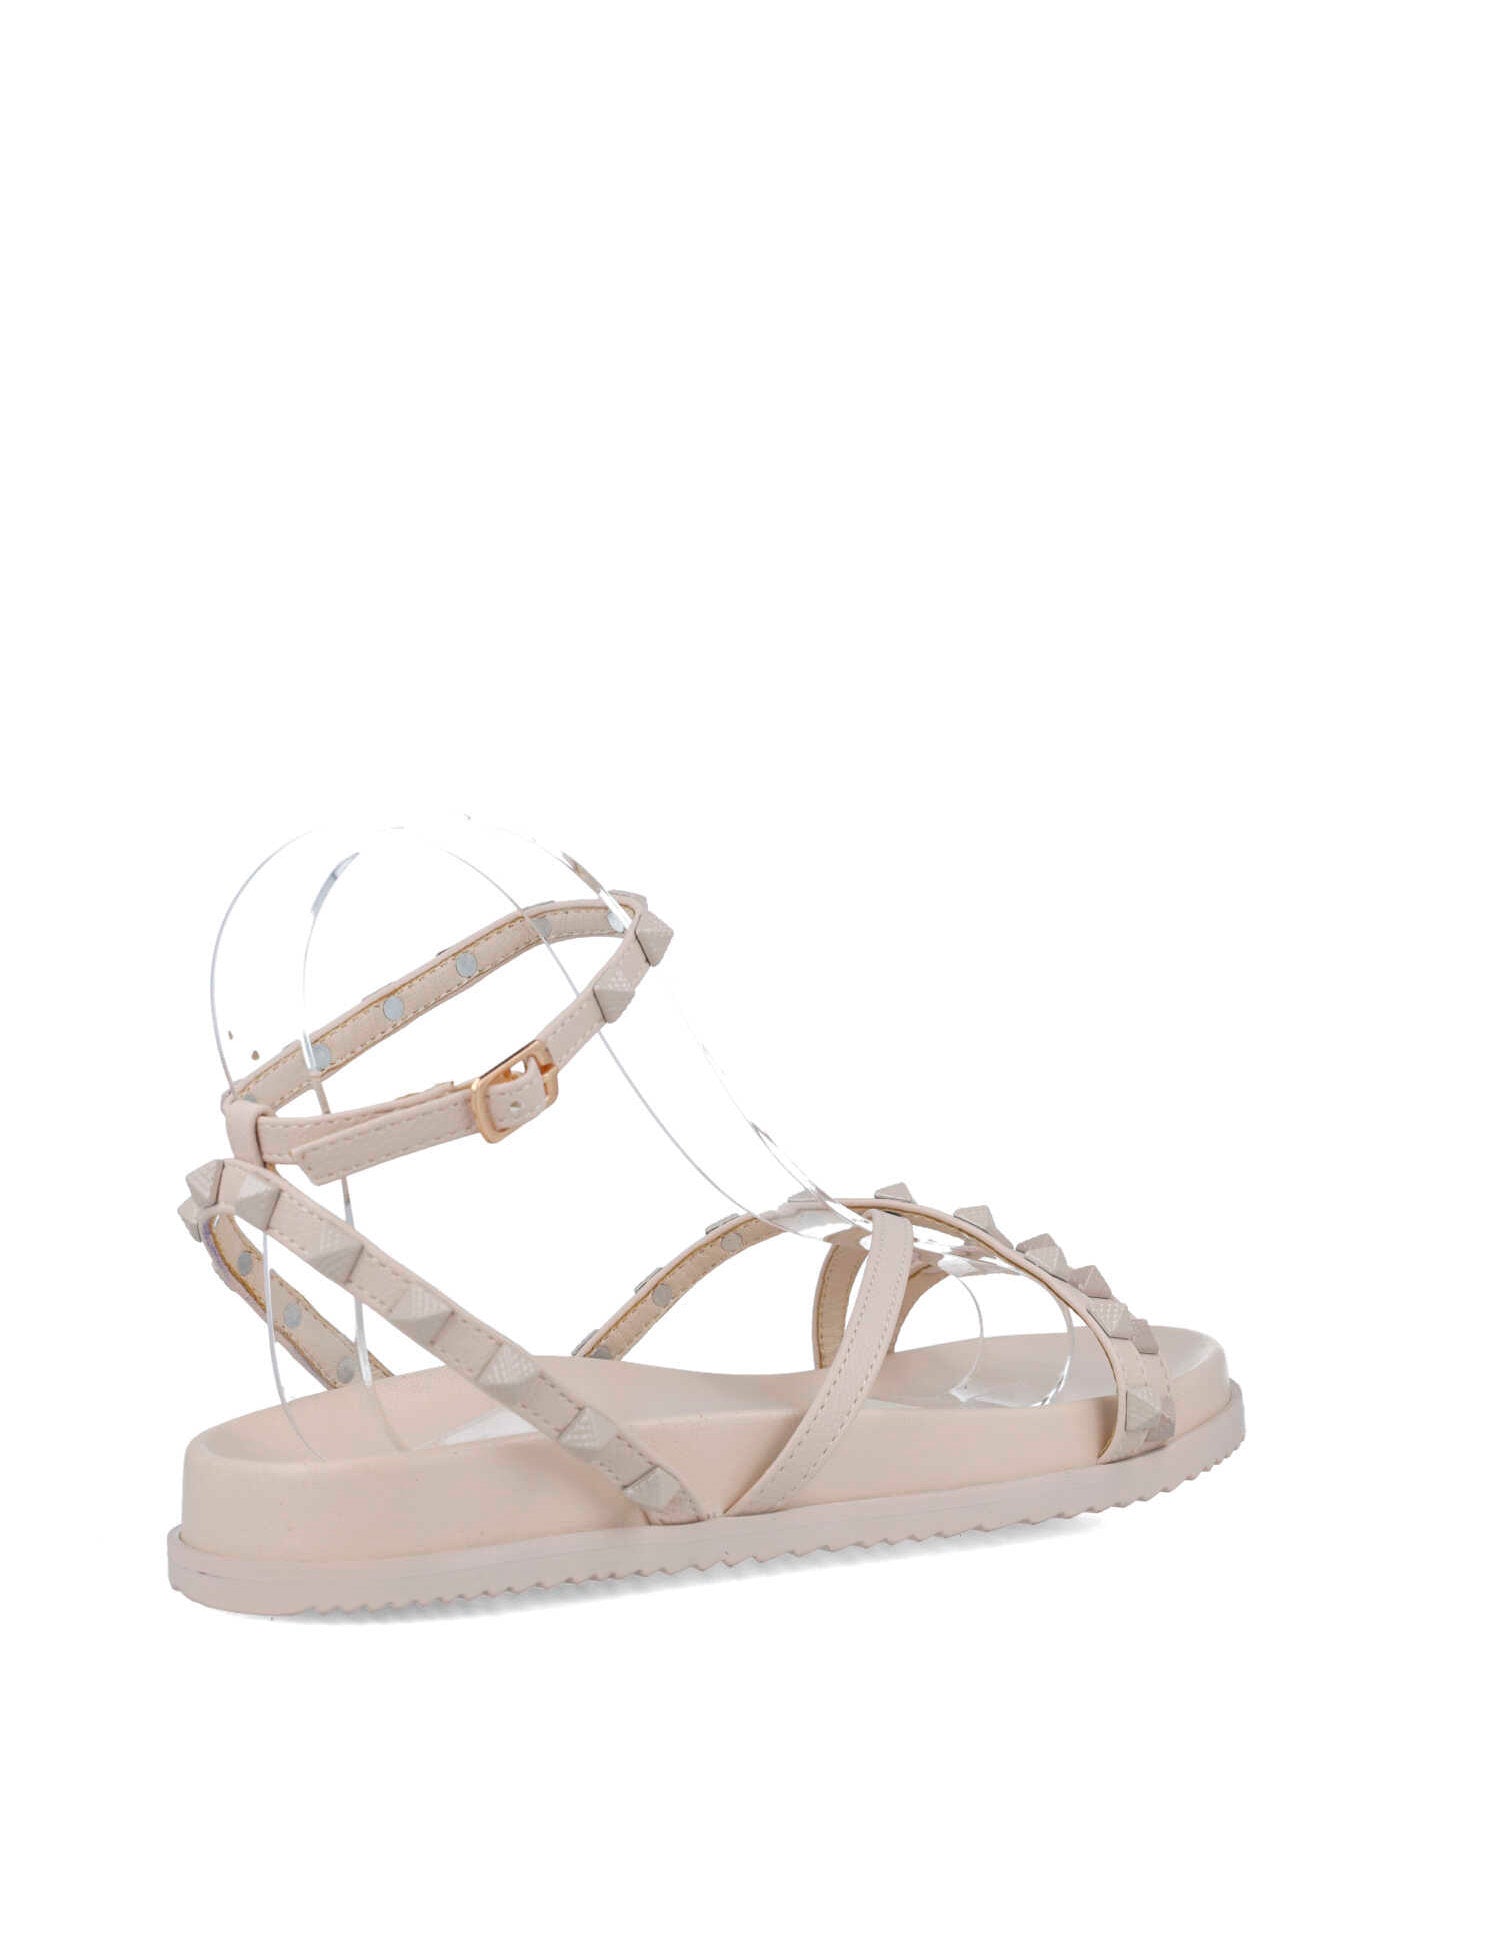 Beige Flat Sandals With Studded Straps_24898_06_03